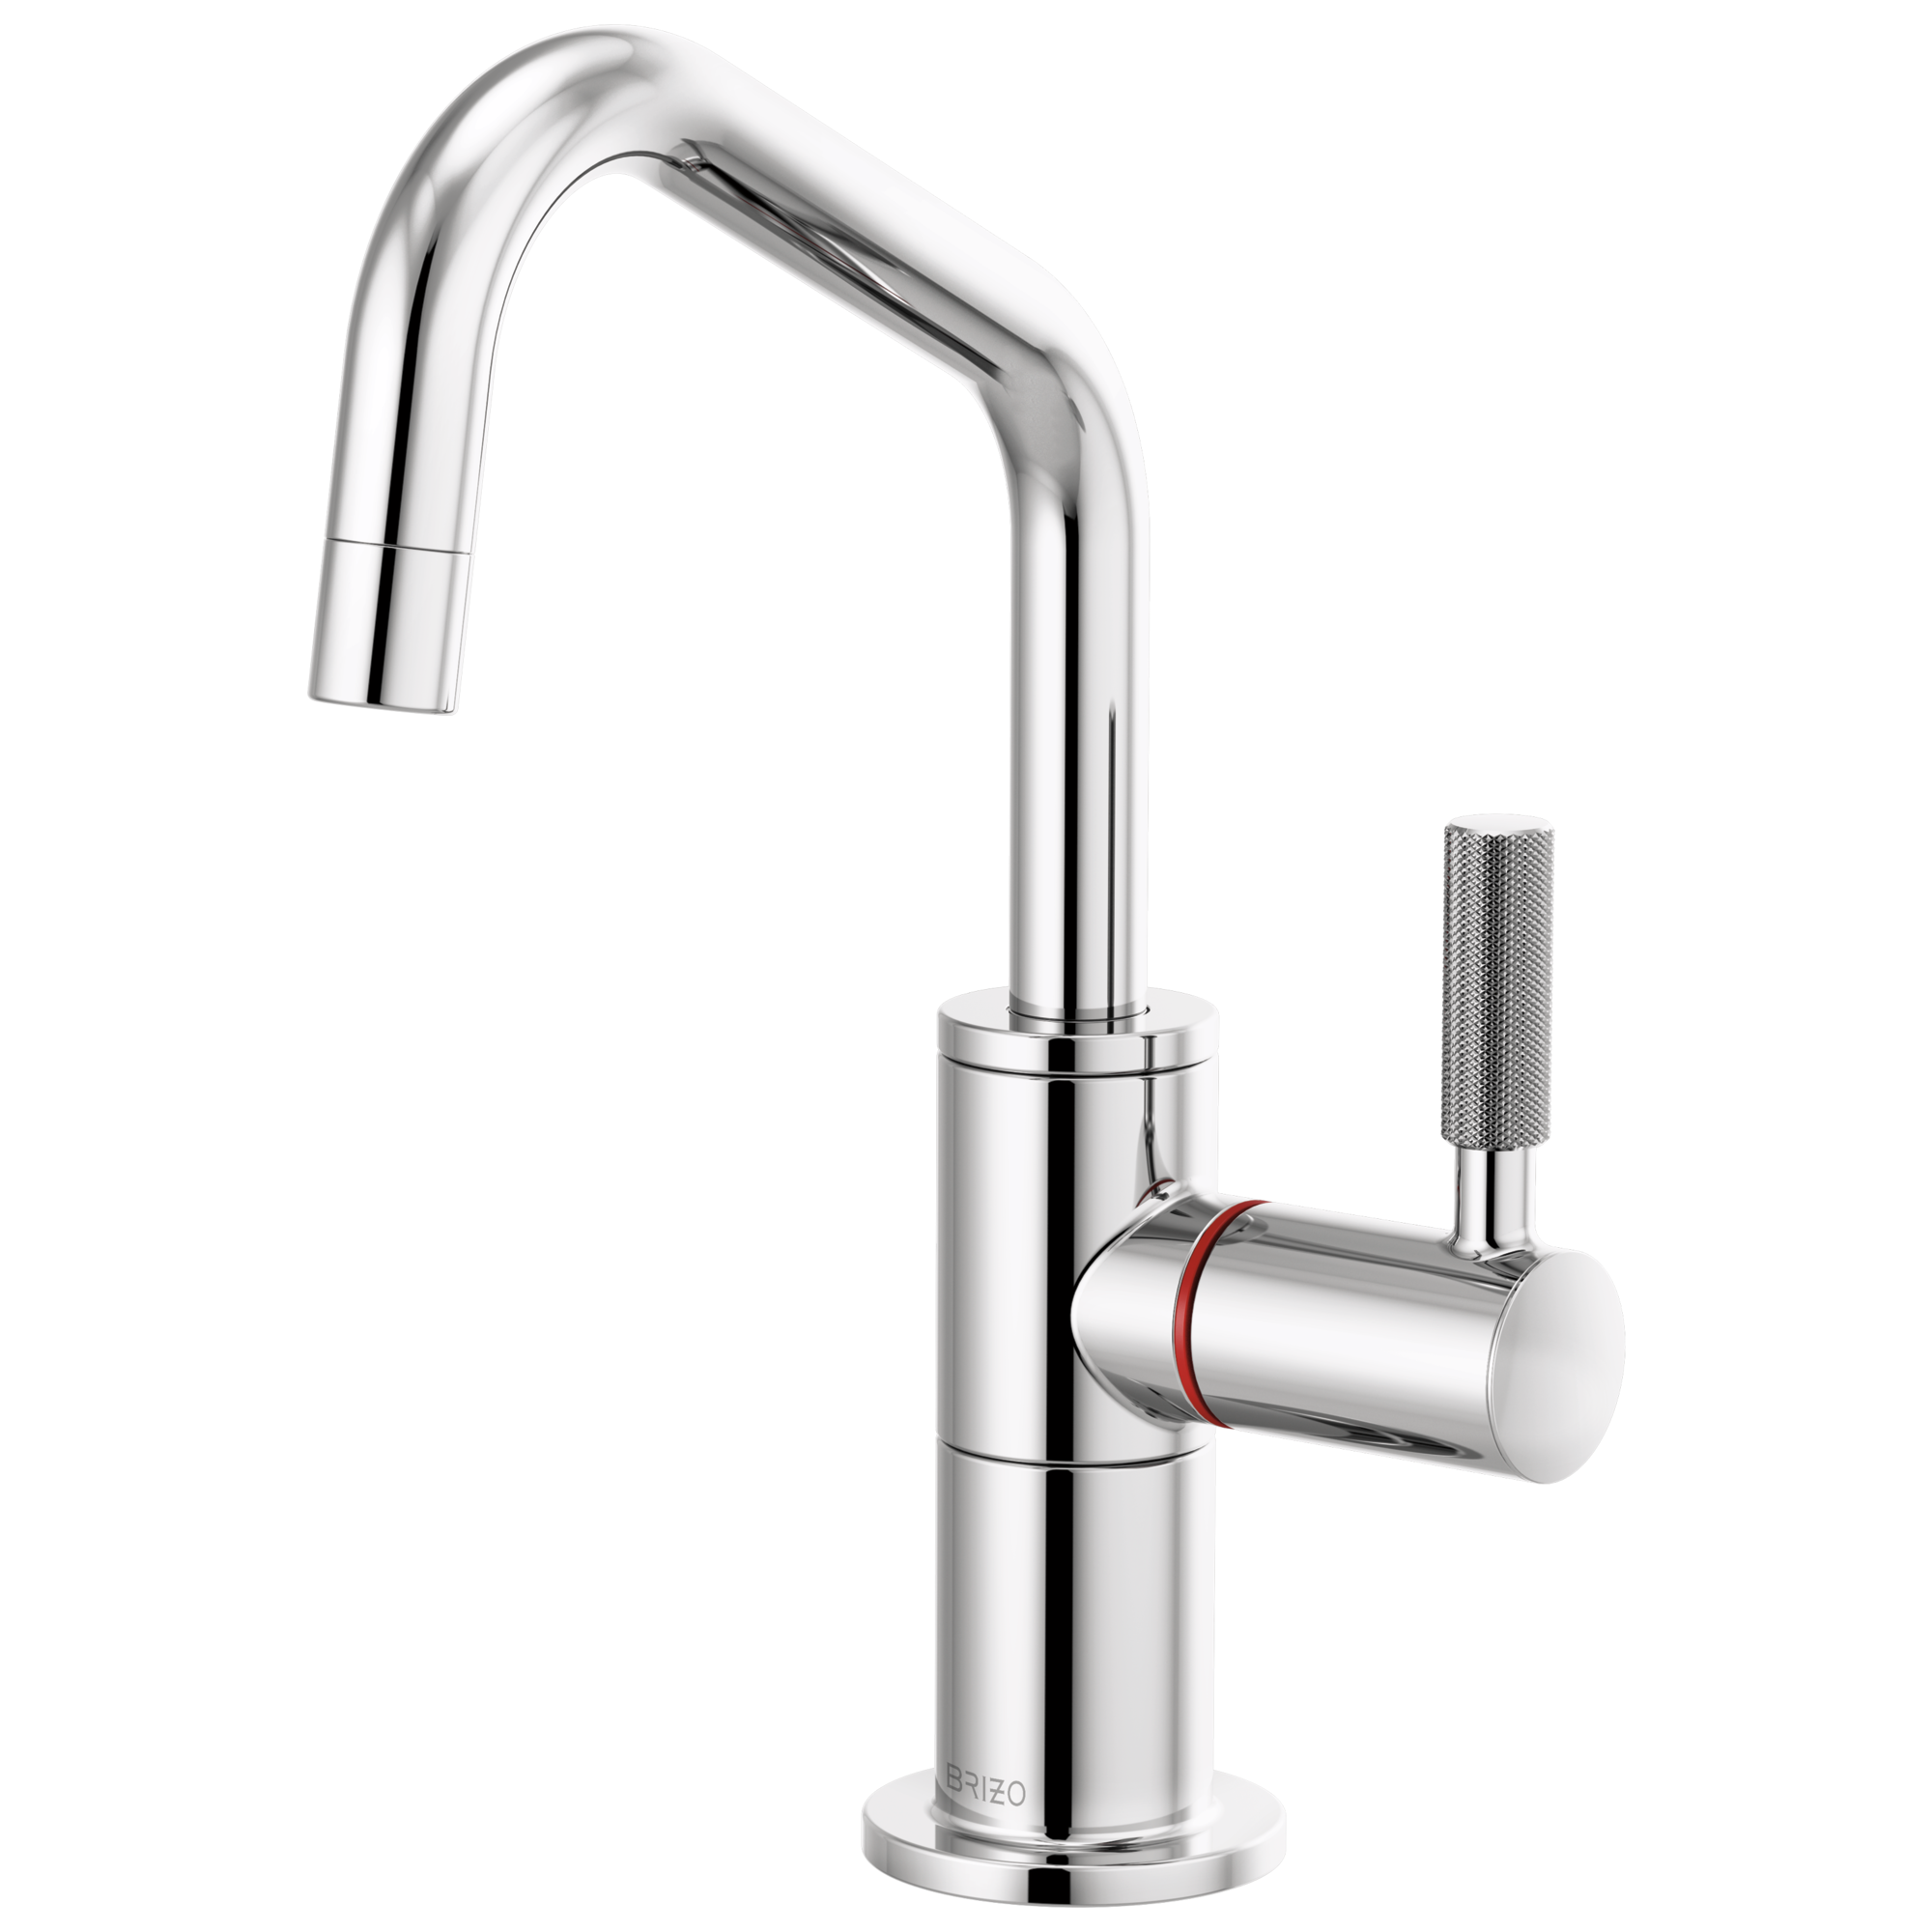 Brizo Litze: Beverage Faucet with Angled Spout and Knurled Handle